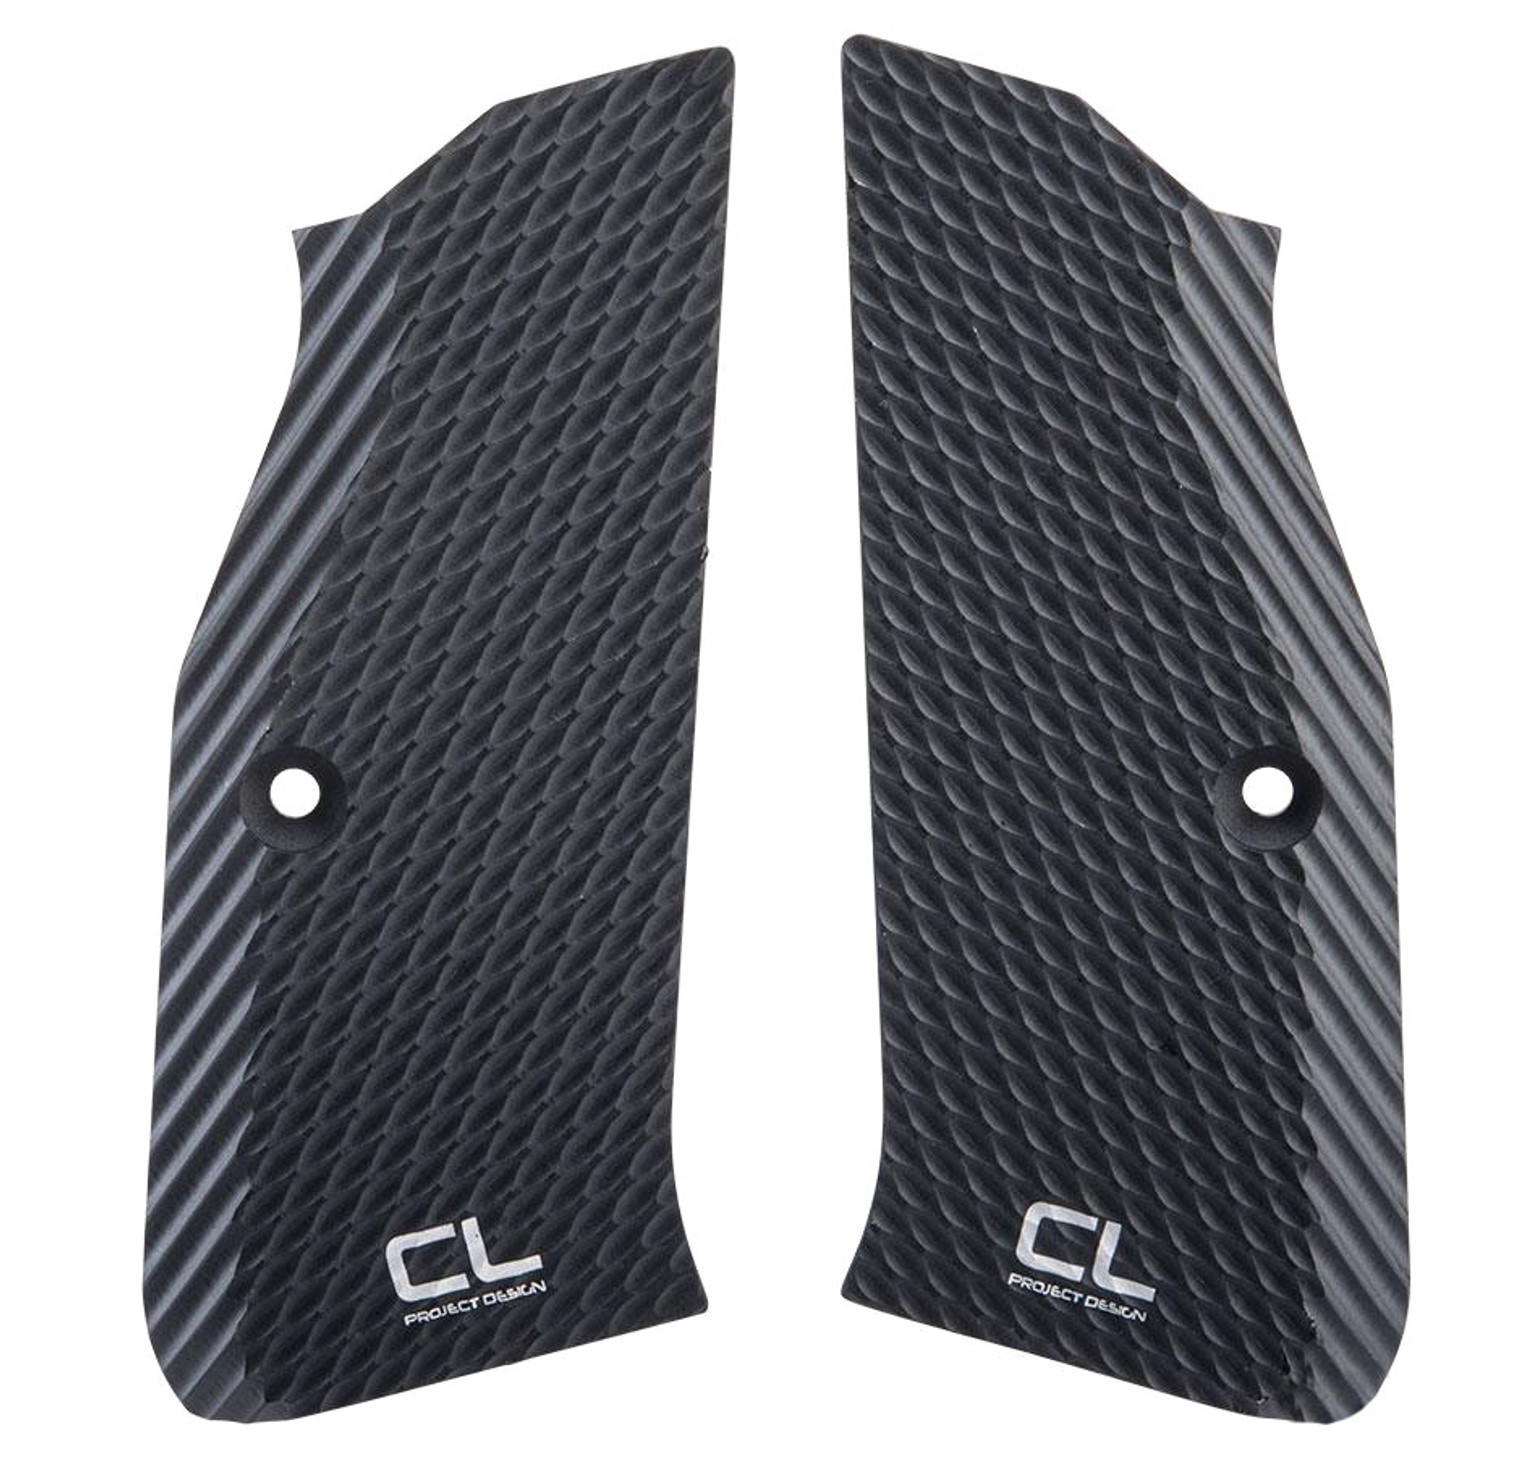 CL Project CNC Aluminum Grip Panels for ASG Shadow 2 Airsoft Gas Blowback Pistols